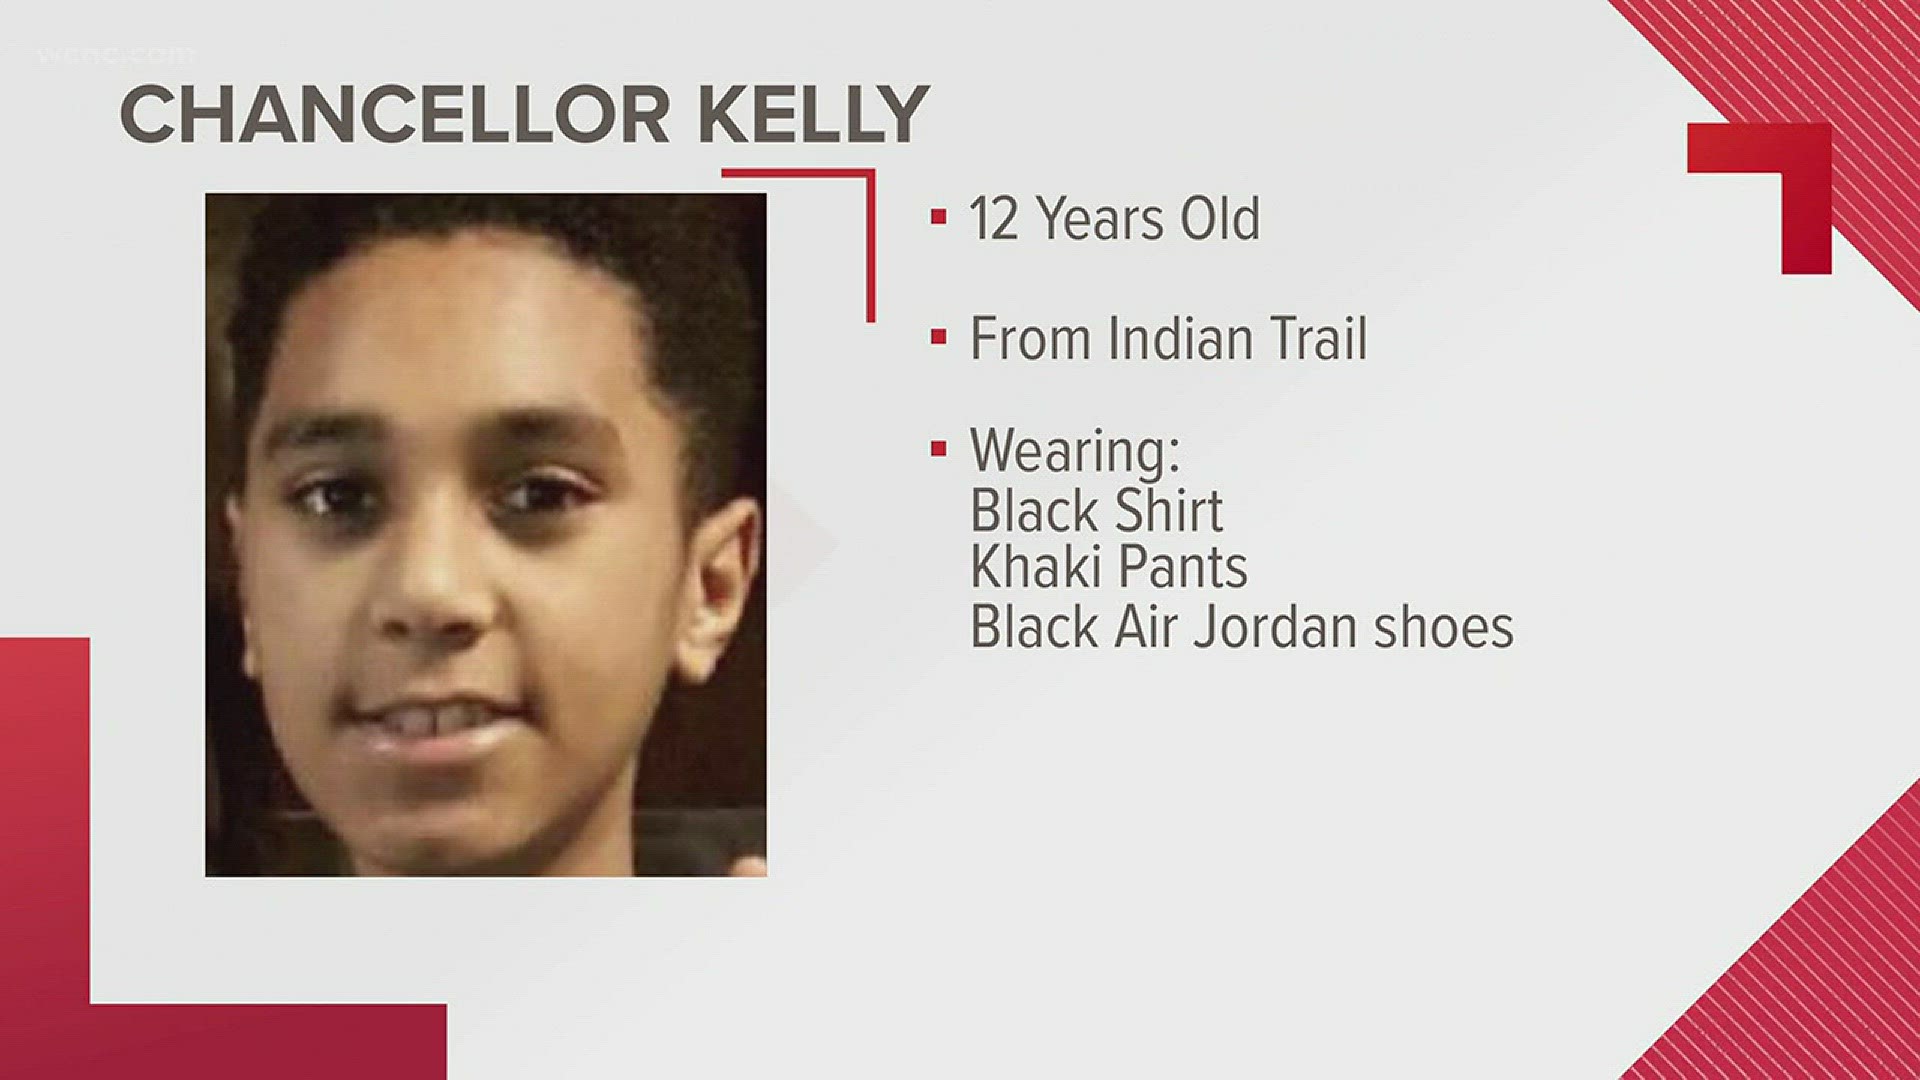 Deputies in Union County are asking for the public's help finding a missing child.